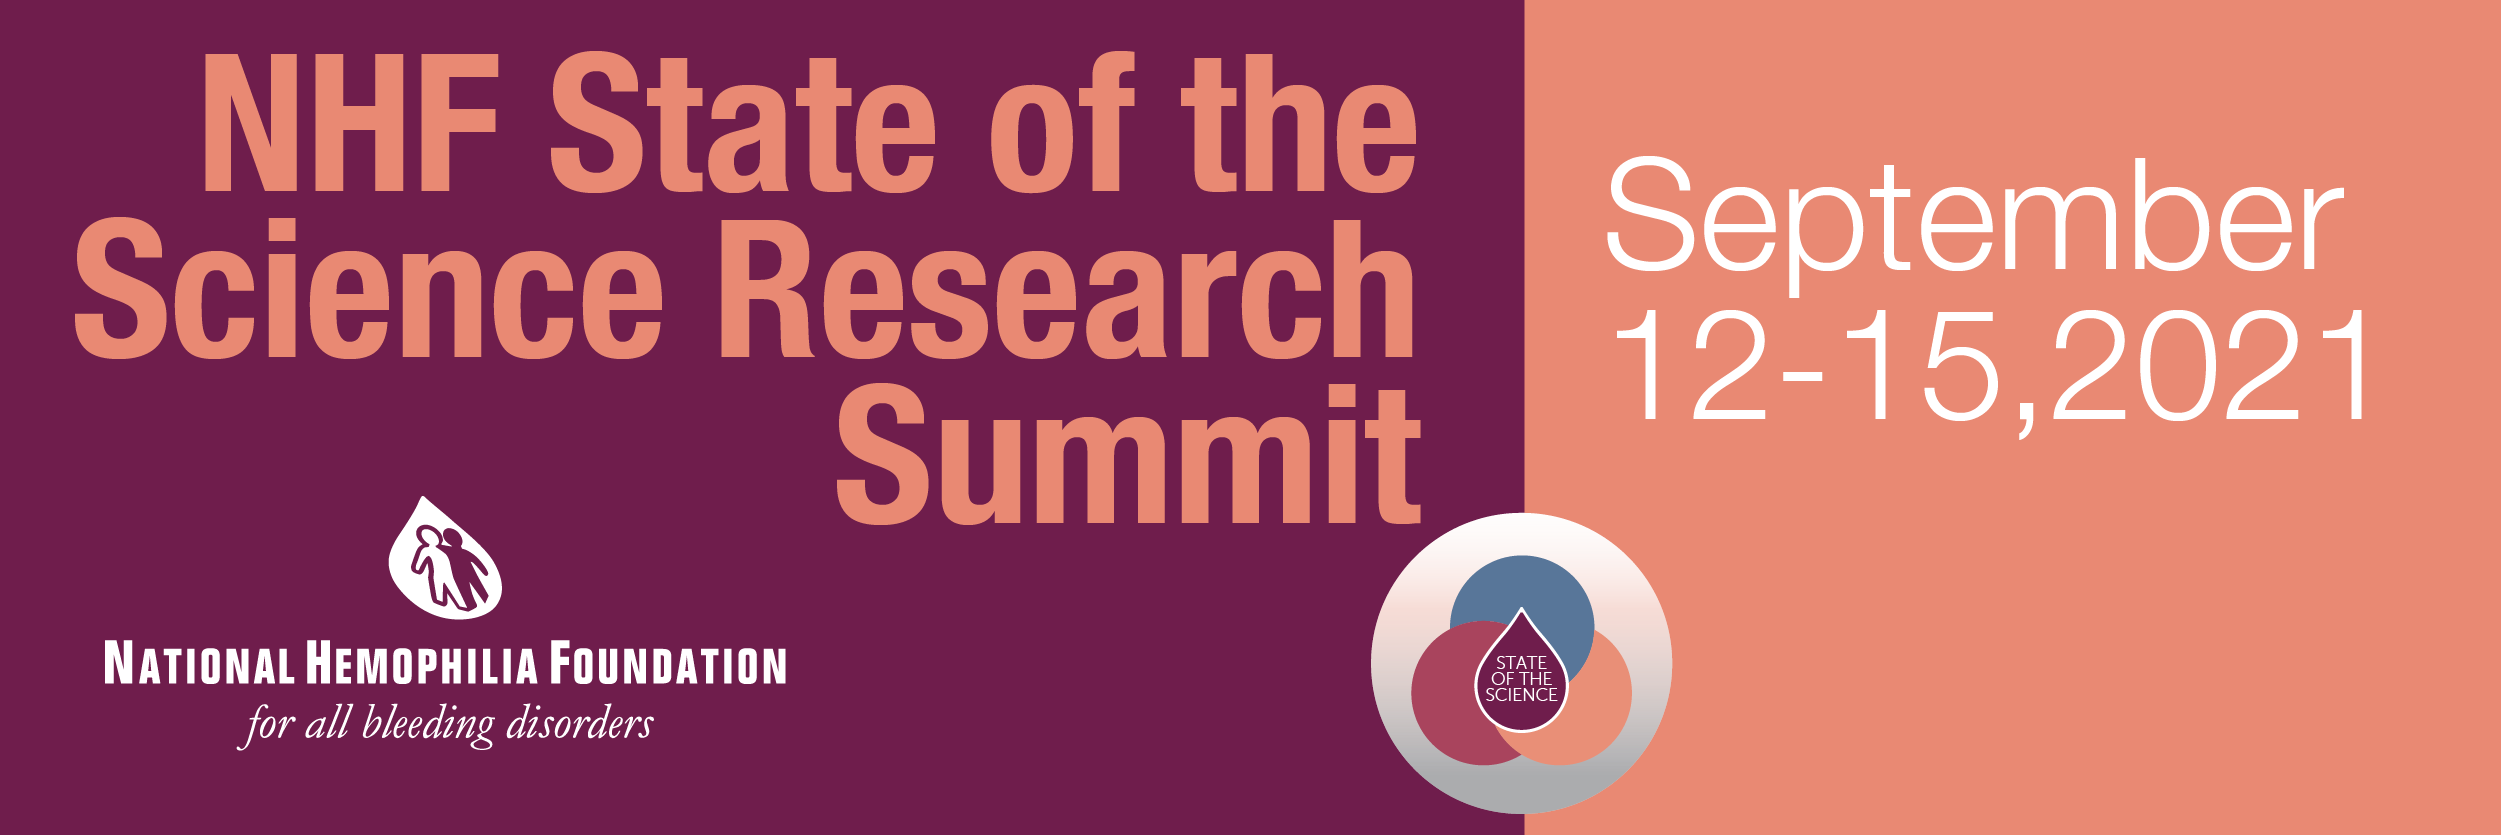 NHF State of the Science Research Summit 2021